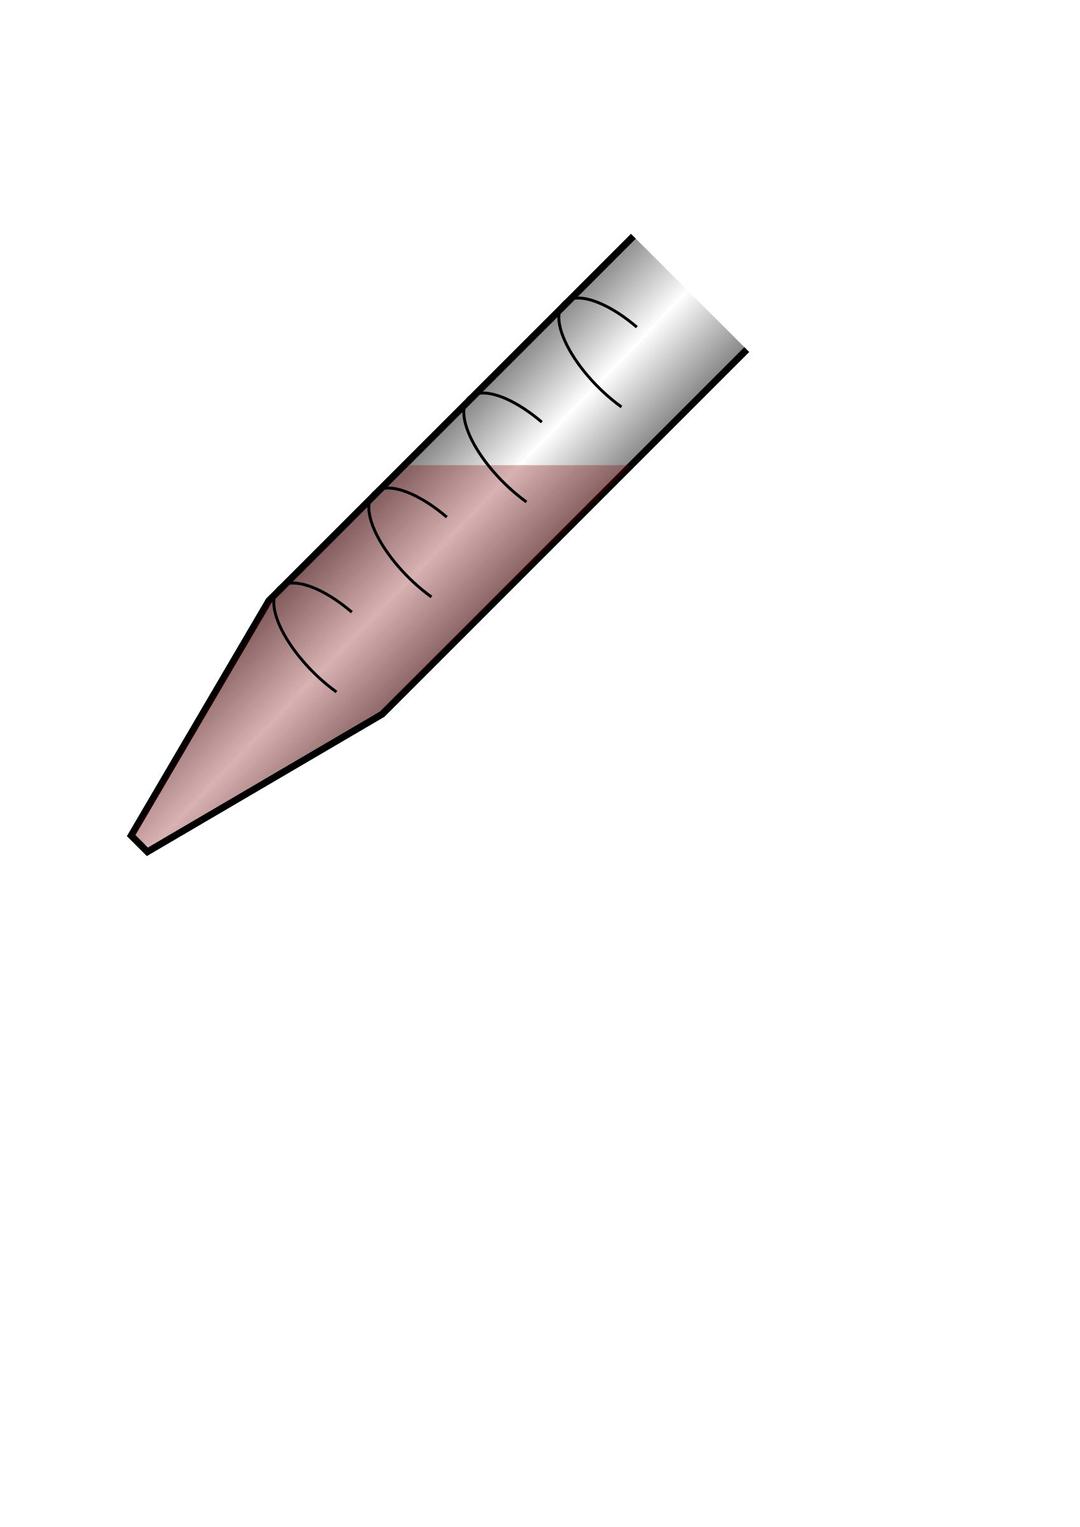 Pipette with Medium png transparent